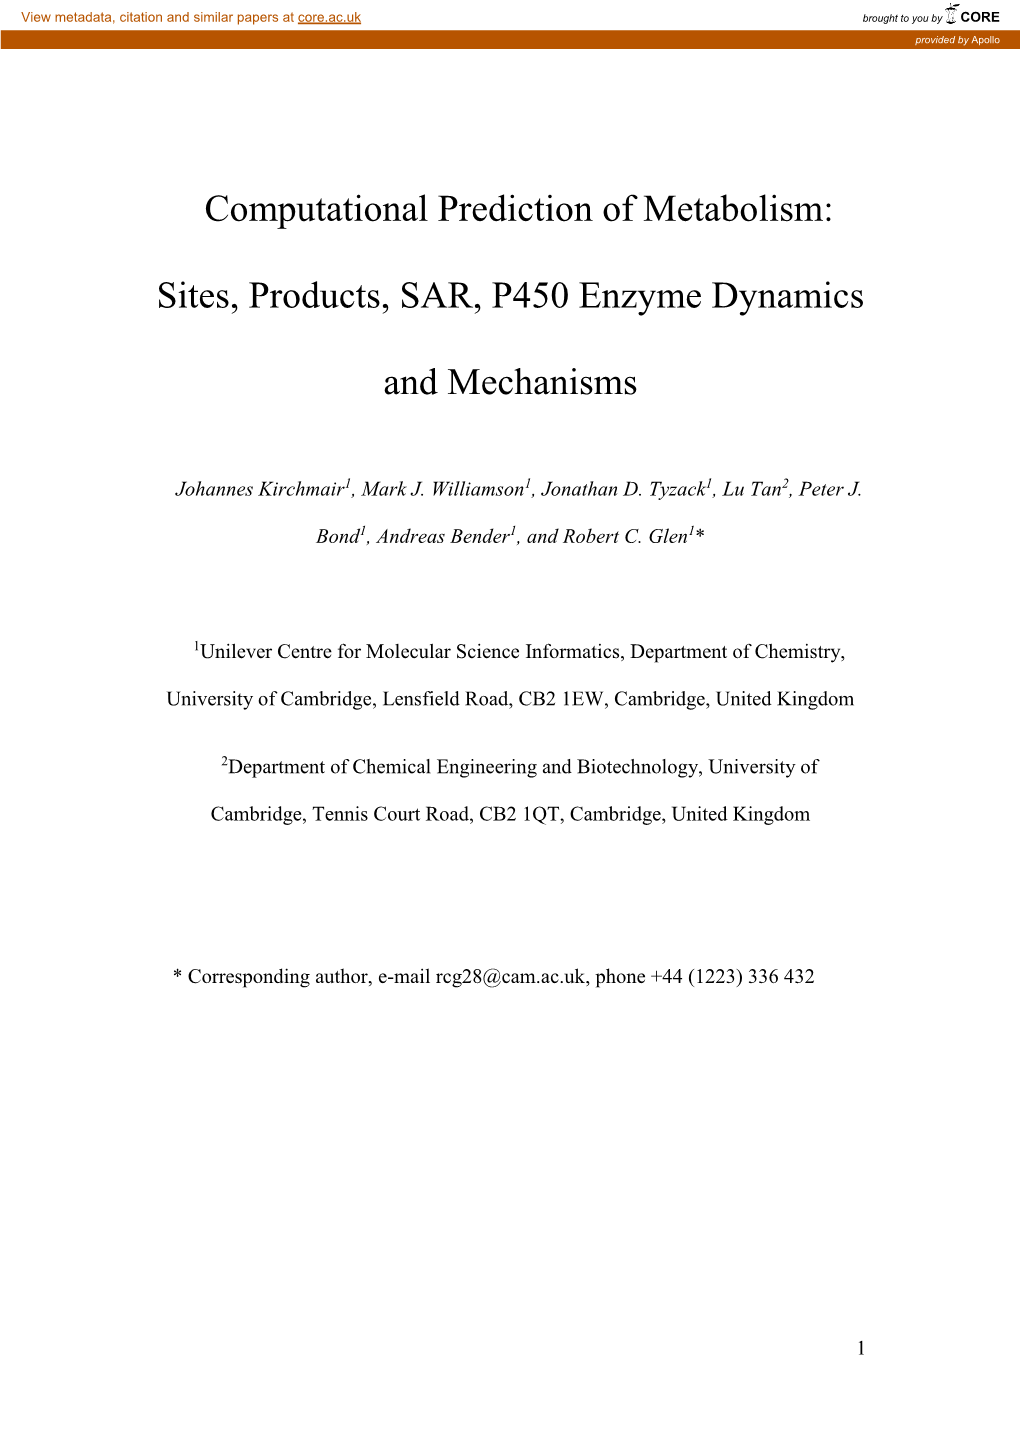 Sites, Products, SAR, P450 Enzyme Dynamics and Mechanisms